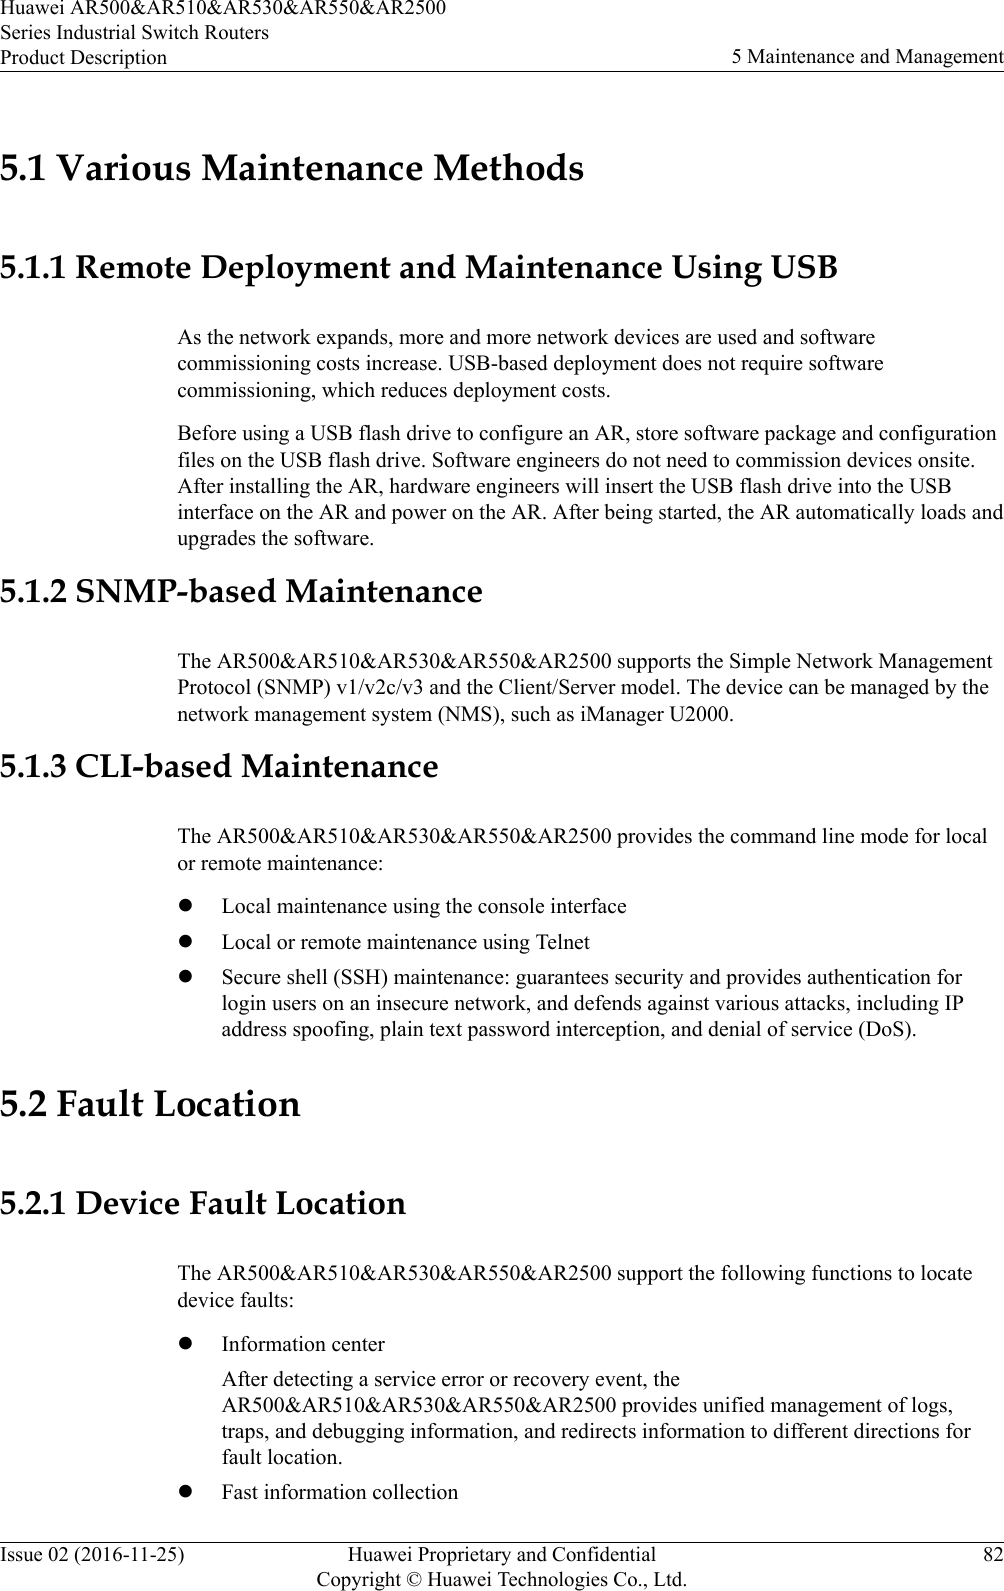 5.1 Various Maintenance Methods5.1.1 Remote Deployment and Maintenance Using USBAs the network expands, more and more network devices are used and softwarecommissioning costs increase. USB-based deployment does not require softwarecommissioning, which reduces deployment costs.Before using a USB flash drive to configure an AR, store software package and configurationfiles on the USB flash drive. Software engineers do not need to commission devices onsite.After installing the AR, hardware engineers will insert the USB flash drive into the USBinterface on the AR and power on the AR. After being started, the AR automatically loads andupgrades the software.5.1.2 SNMP-based MaintenanceThe AR500&amp;AR510&amp;AR530&amp;AR550&amp;AR2500 supports the Simple Network ManagementProtocol (SNMP) v1/v2c/v3 and the Client/Server model. The device can be managed by thenetwork management system (NMS), such as iManager U2000.5.1.3 CLI-based MaintenanceThe AR500&amp;AR510&amp;AR530&amp;AR550&amp;AR2500 provides the command line mode for localor remote maintenance:lLocal maintenance using the console interfacelLocal or remote maintenance using TelnetlSecure shell (SSH) maintenance: guarantees security and provides authentication forlogin users on an insecure network, and defends against various attacks, including IPaddress spoofing, plain text password interception, and denial of service (DoS).5.2 Fault Location5.2.1 Device Fault LocationThe AR500&amp;AR510&amp;AR530&amp;AR550&amp;AR2500 support the following functions to locatedevice faults:lInformation centerAfter detecting a service error or recovery event, theAR500&amp;AR510&amp;AR530&amp;AR550&amp;AR2500 provides unified management of logs,traps, and debugging information, and redirects information to different directions forfault location.lFast information collectionHuawei AR500&amp;AR510&amp;AR530&amp;AR550&amp;AR2500Series Industrial Switch RoutersProduct Description 5 Maintenance and ManagementIssue 02 (2016-11-25) Huawei Proprietary and ConfidentialCopyright © Huawei Technologies Co., Ltd.82